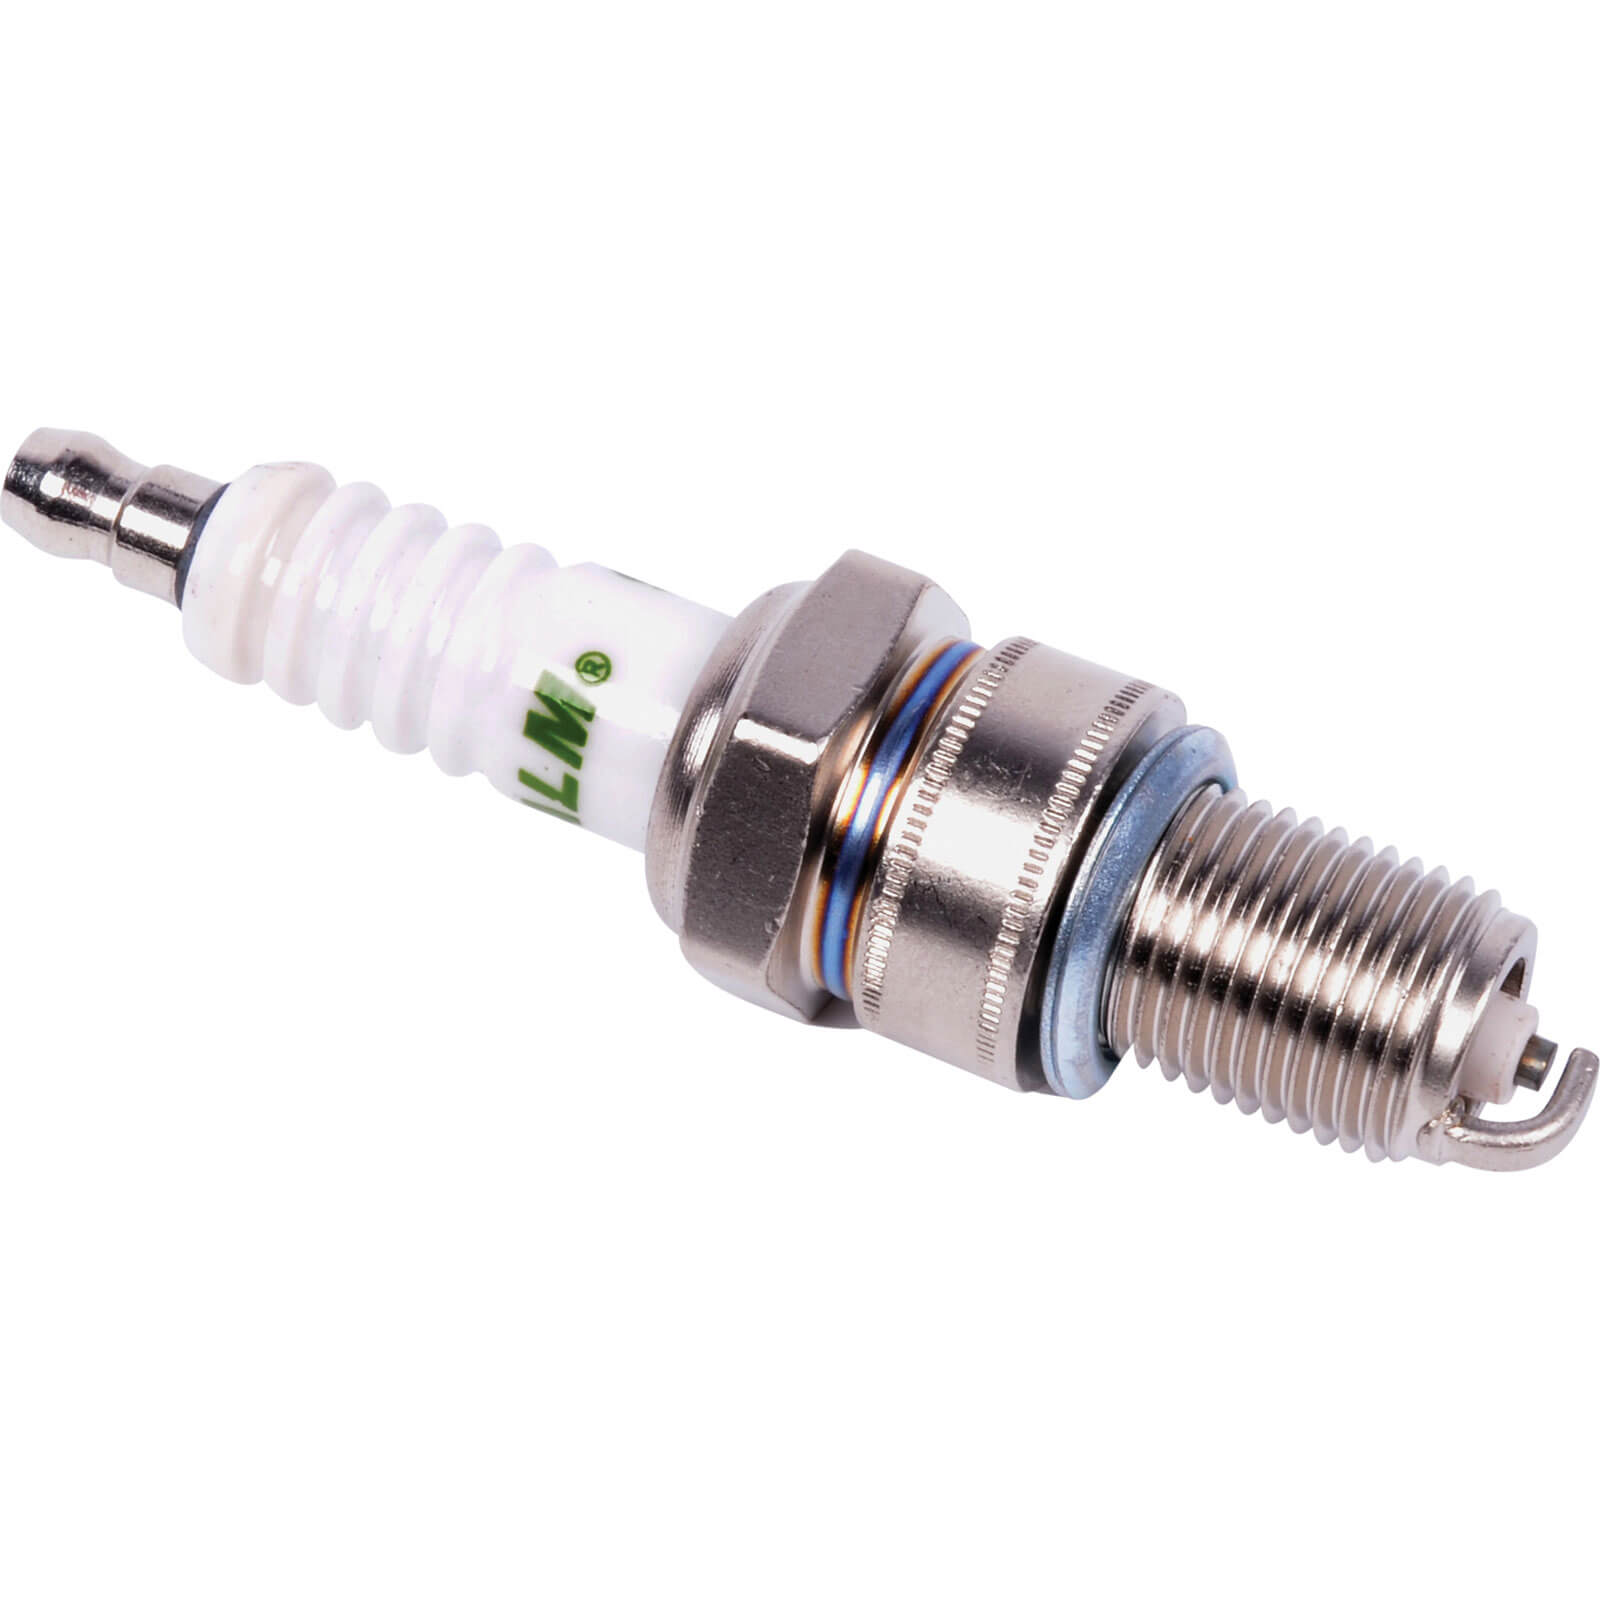 Photos - Lawn Mower Accessory ALM RN9YC Spark Plug for Honda and MacAllister Lawnmowers 